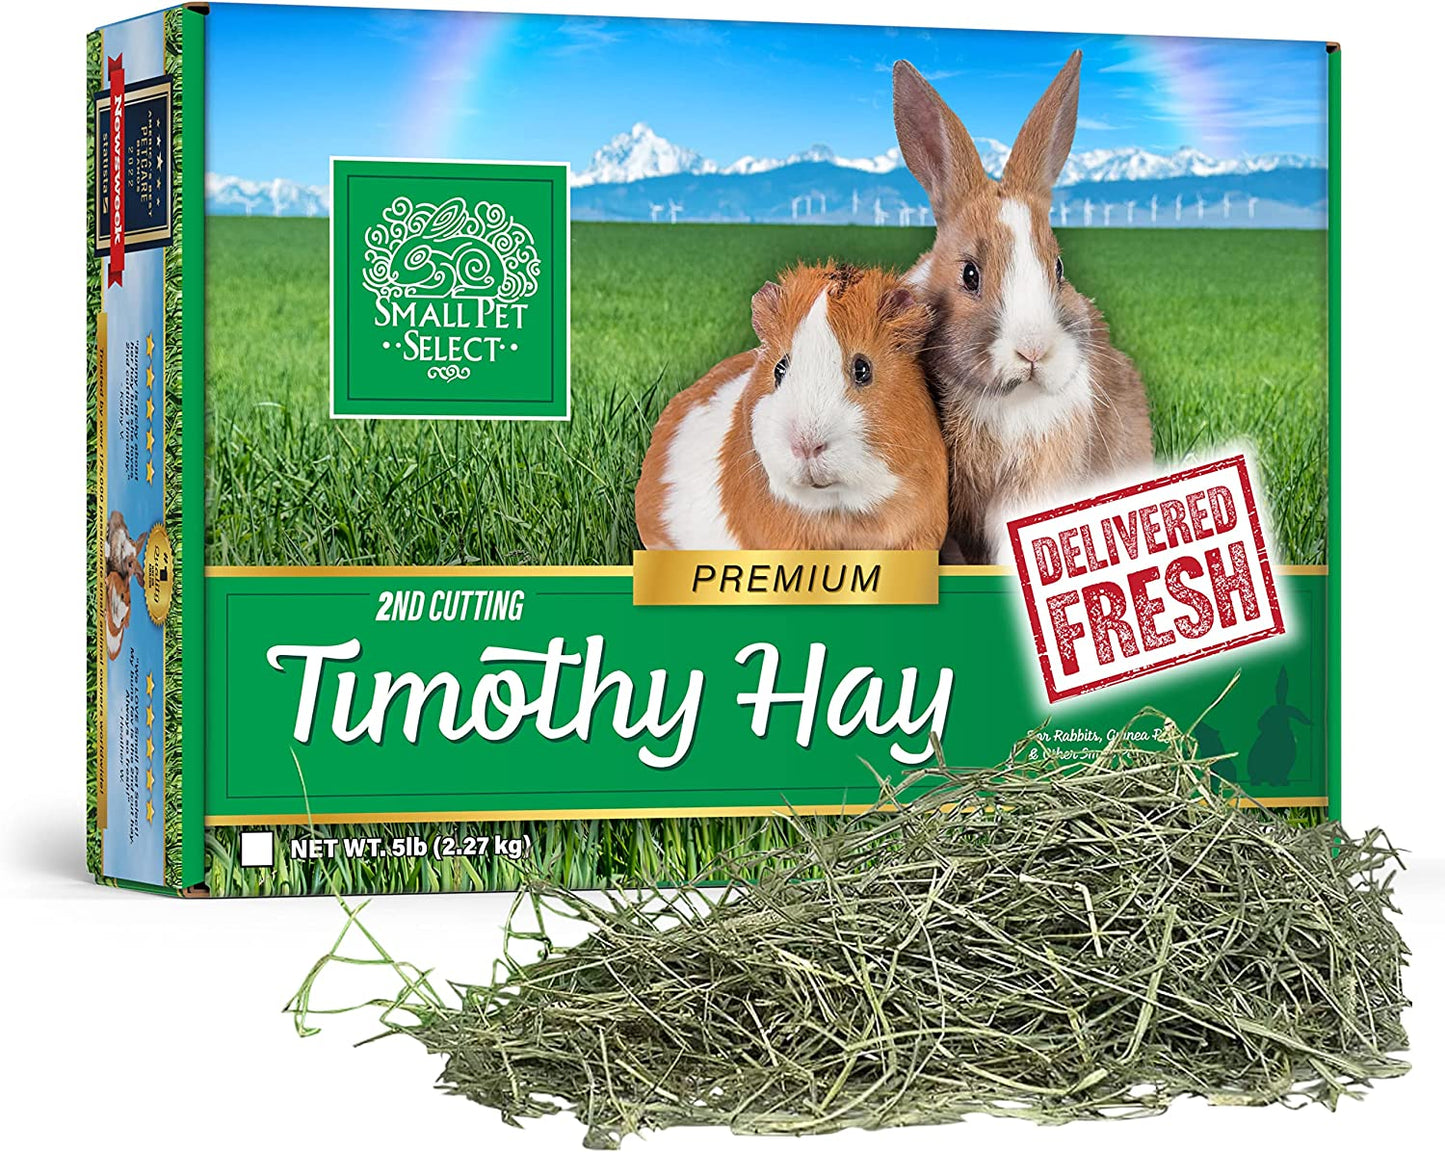 Small Pet Select 2nd Cutting Perfect Blend Timothy Hay Pet Food for Rabbits, Guinea Pigs, Chinchillas and More, Premium Natural Hay Grown in The US, 12 lb